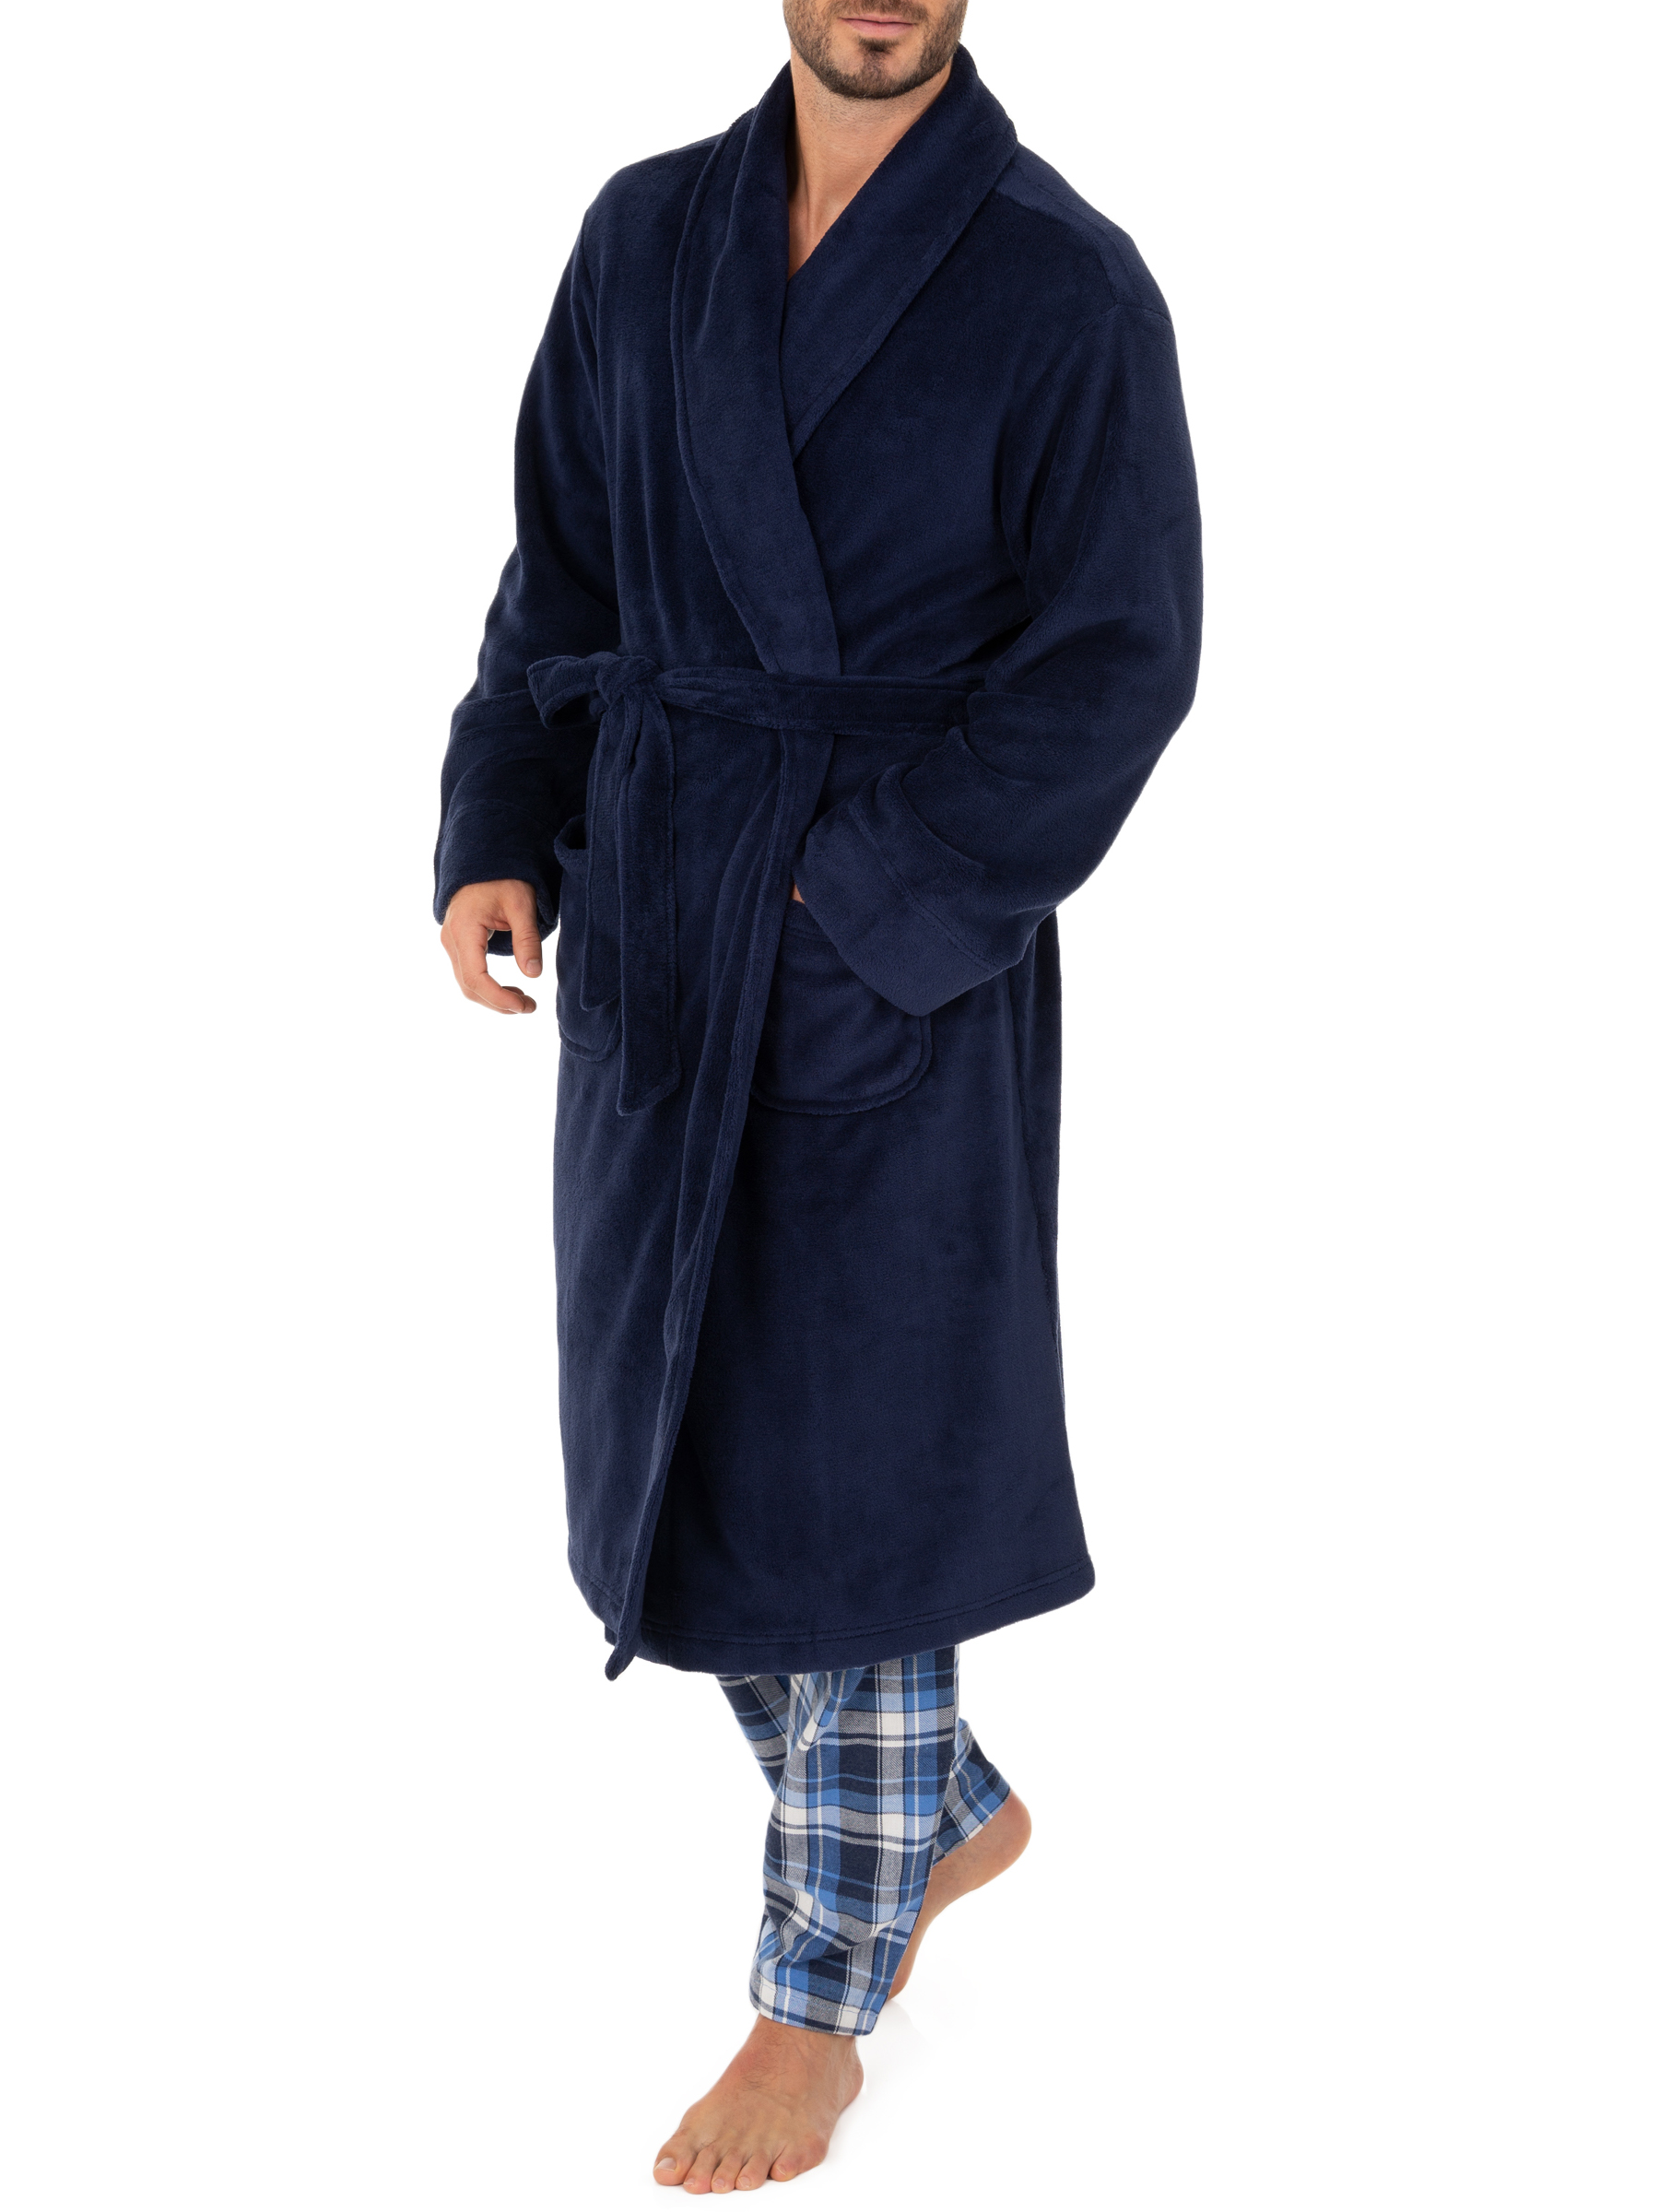 Fruit of the Loom Adult Mens Solid Plush Fleece Bathrobe One Size - image 4 of 5